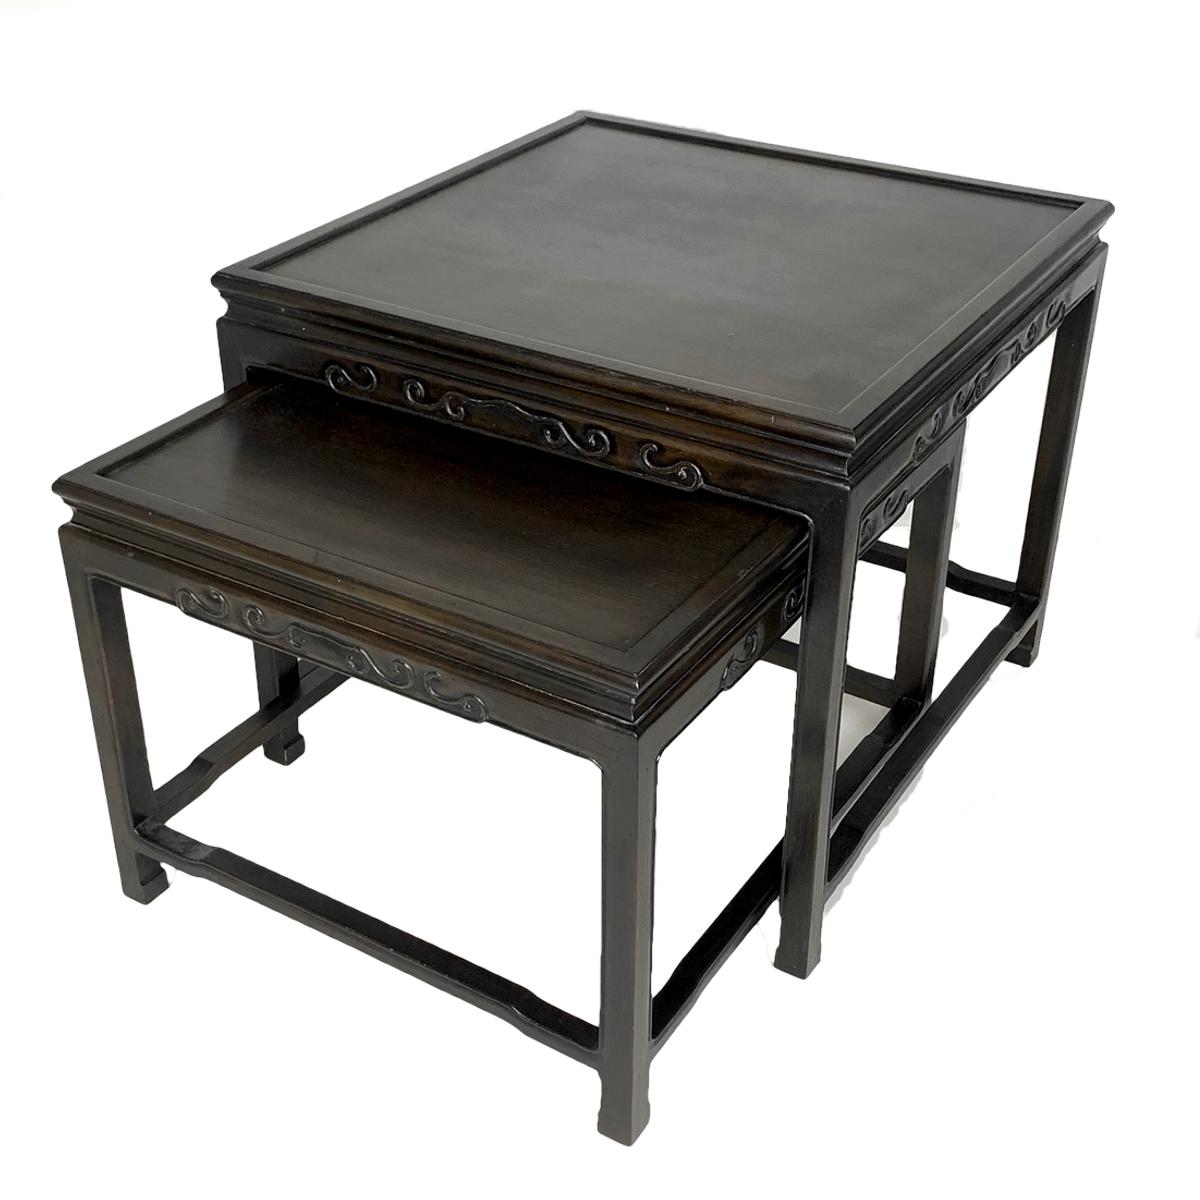 Decorative pair of very usable solid nesting tables with a subtle decorative chinoiserie style. These tables also function well independently. Constructed of ebonized mahogany. Finish shows as a deep dark mahogany- almost black depending on